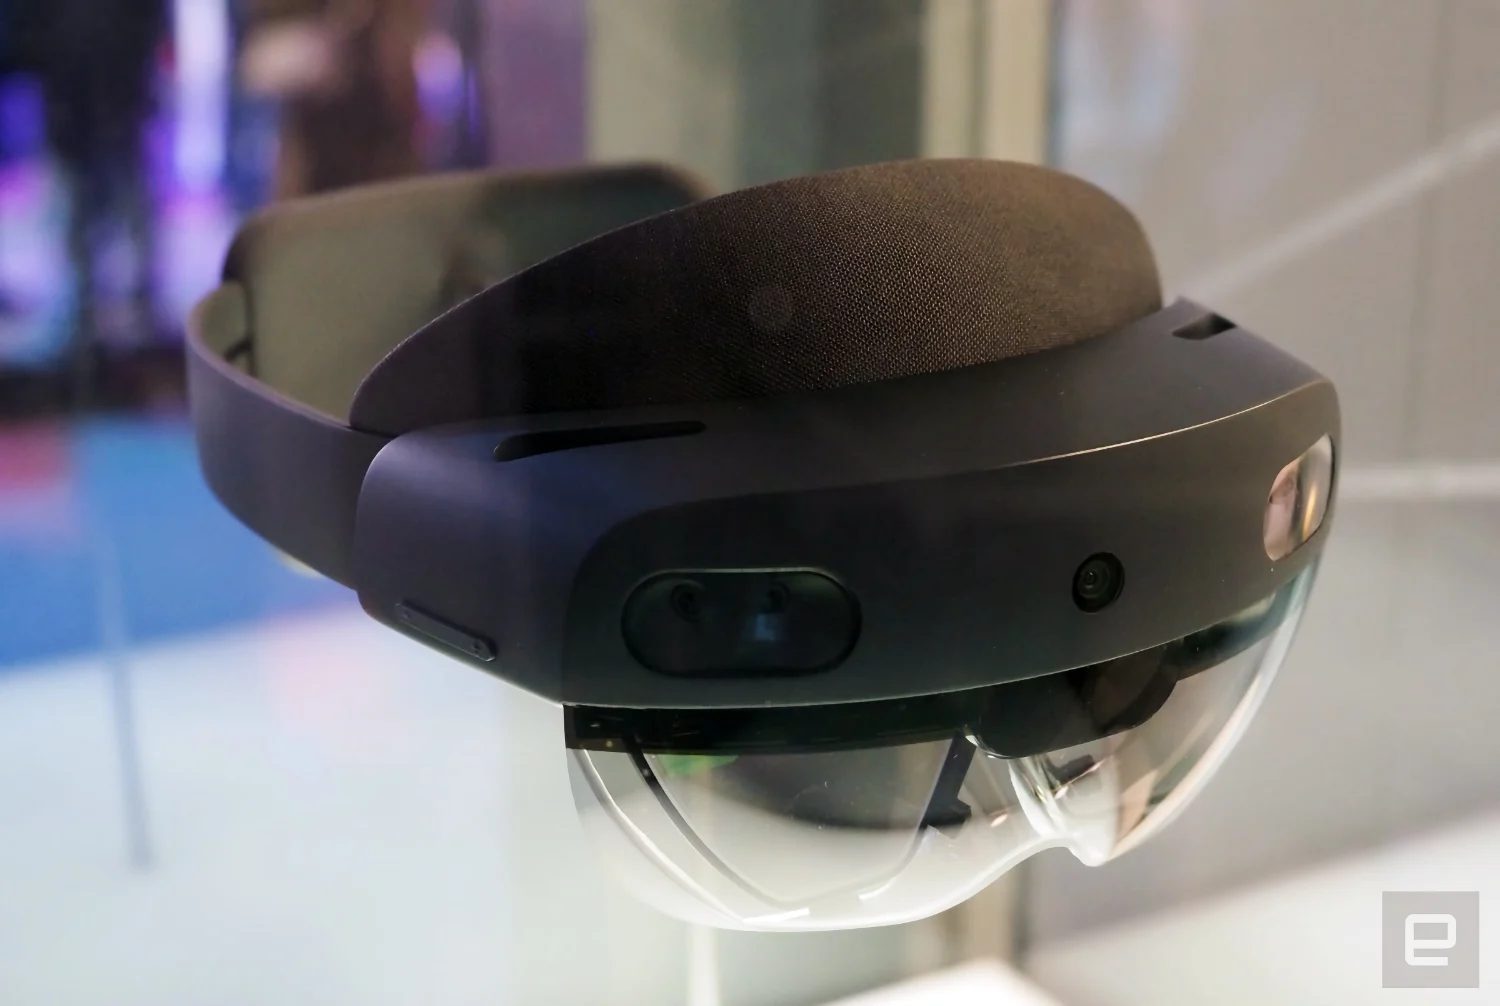 Engadget showroom photography of the HoloLens 2 AR headset.